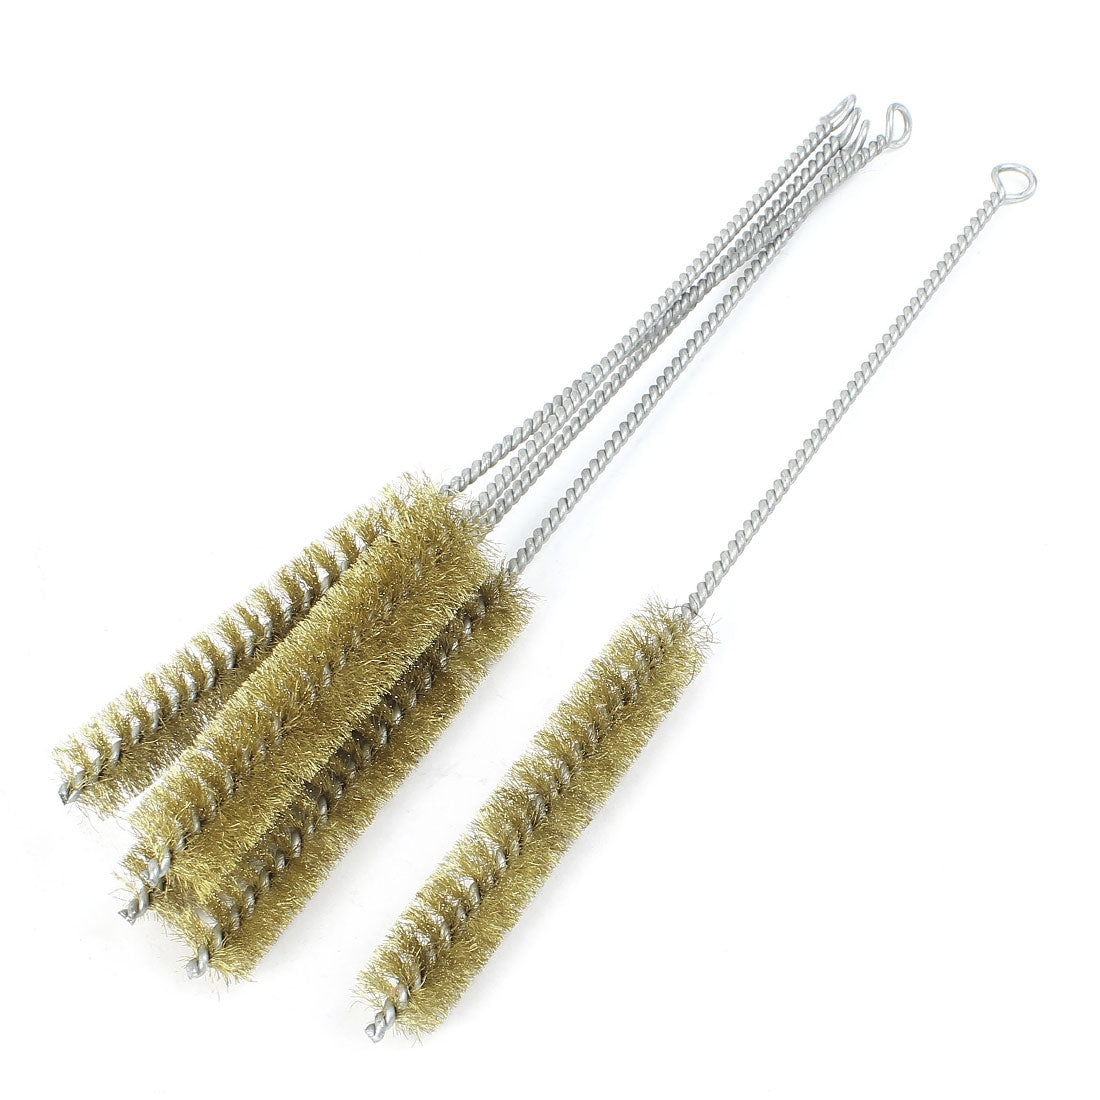 uxcell Uxcell 5 Pcs 20mm Diameter Dense Brass Wire Tube Brush Cleaning Tool 30cm Length